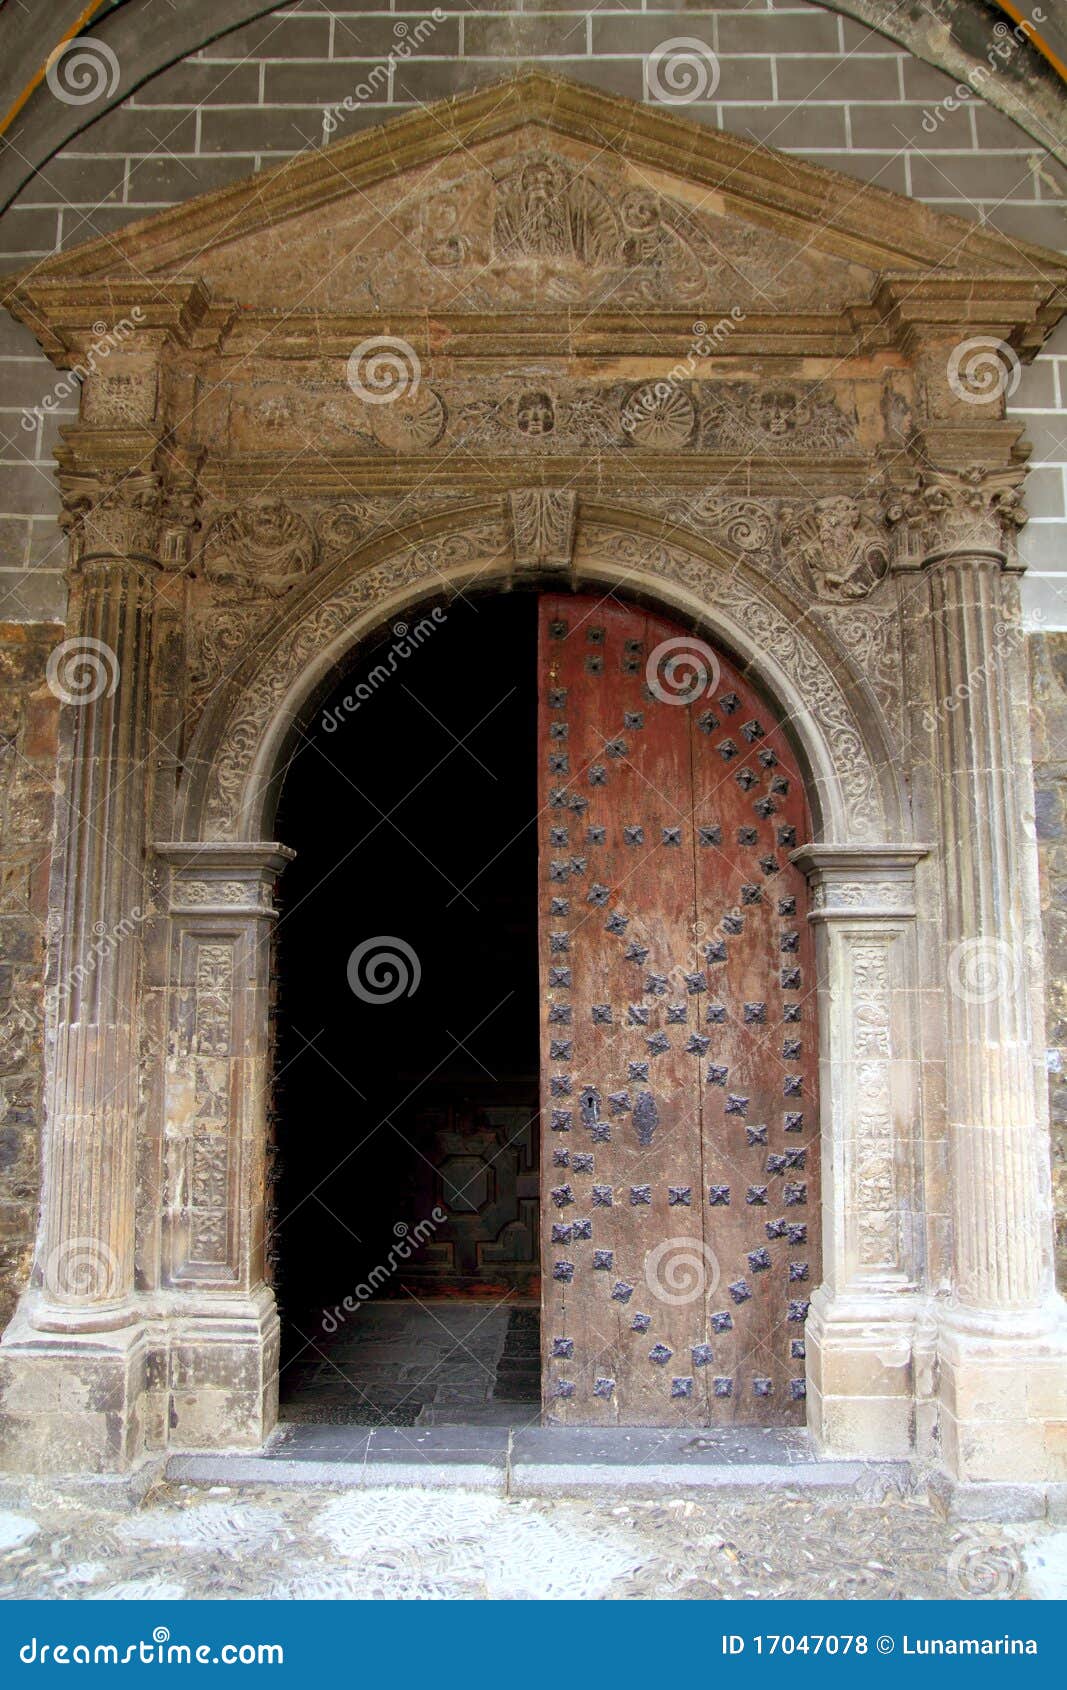 anso romanesque door arch in church pyrenees